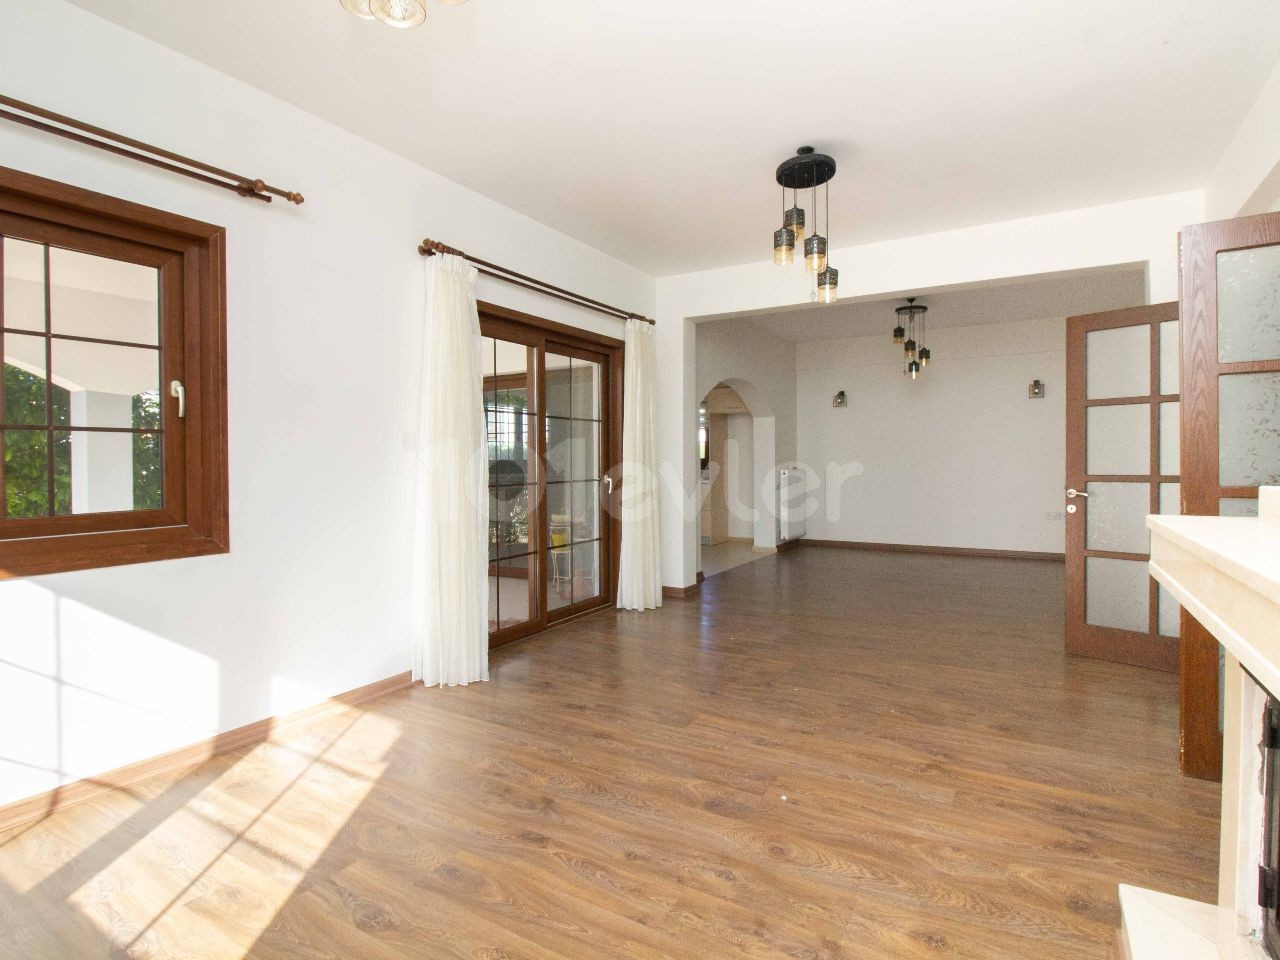 For Sale In Edremit 4+1 Villa With Pool and Large Garden View